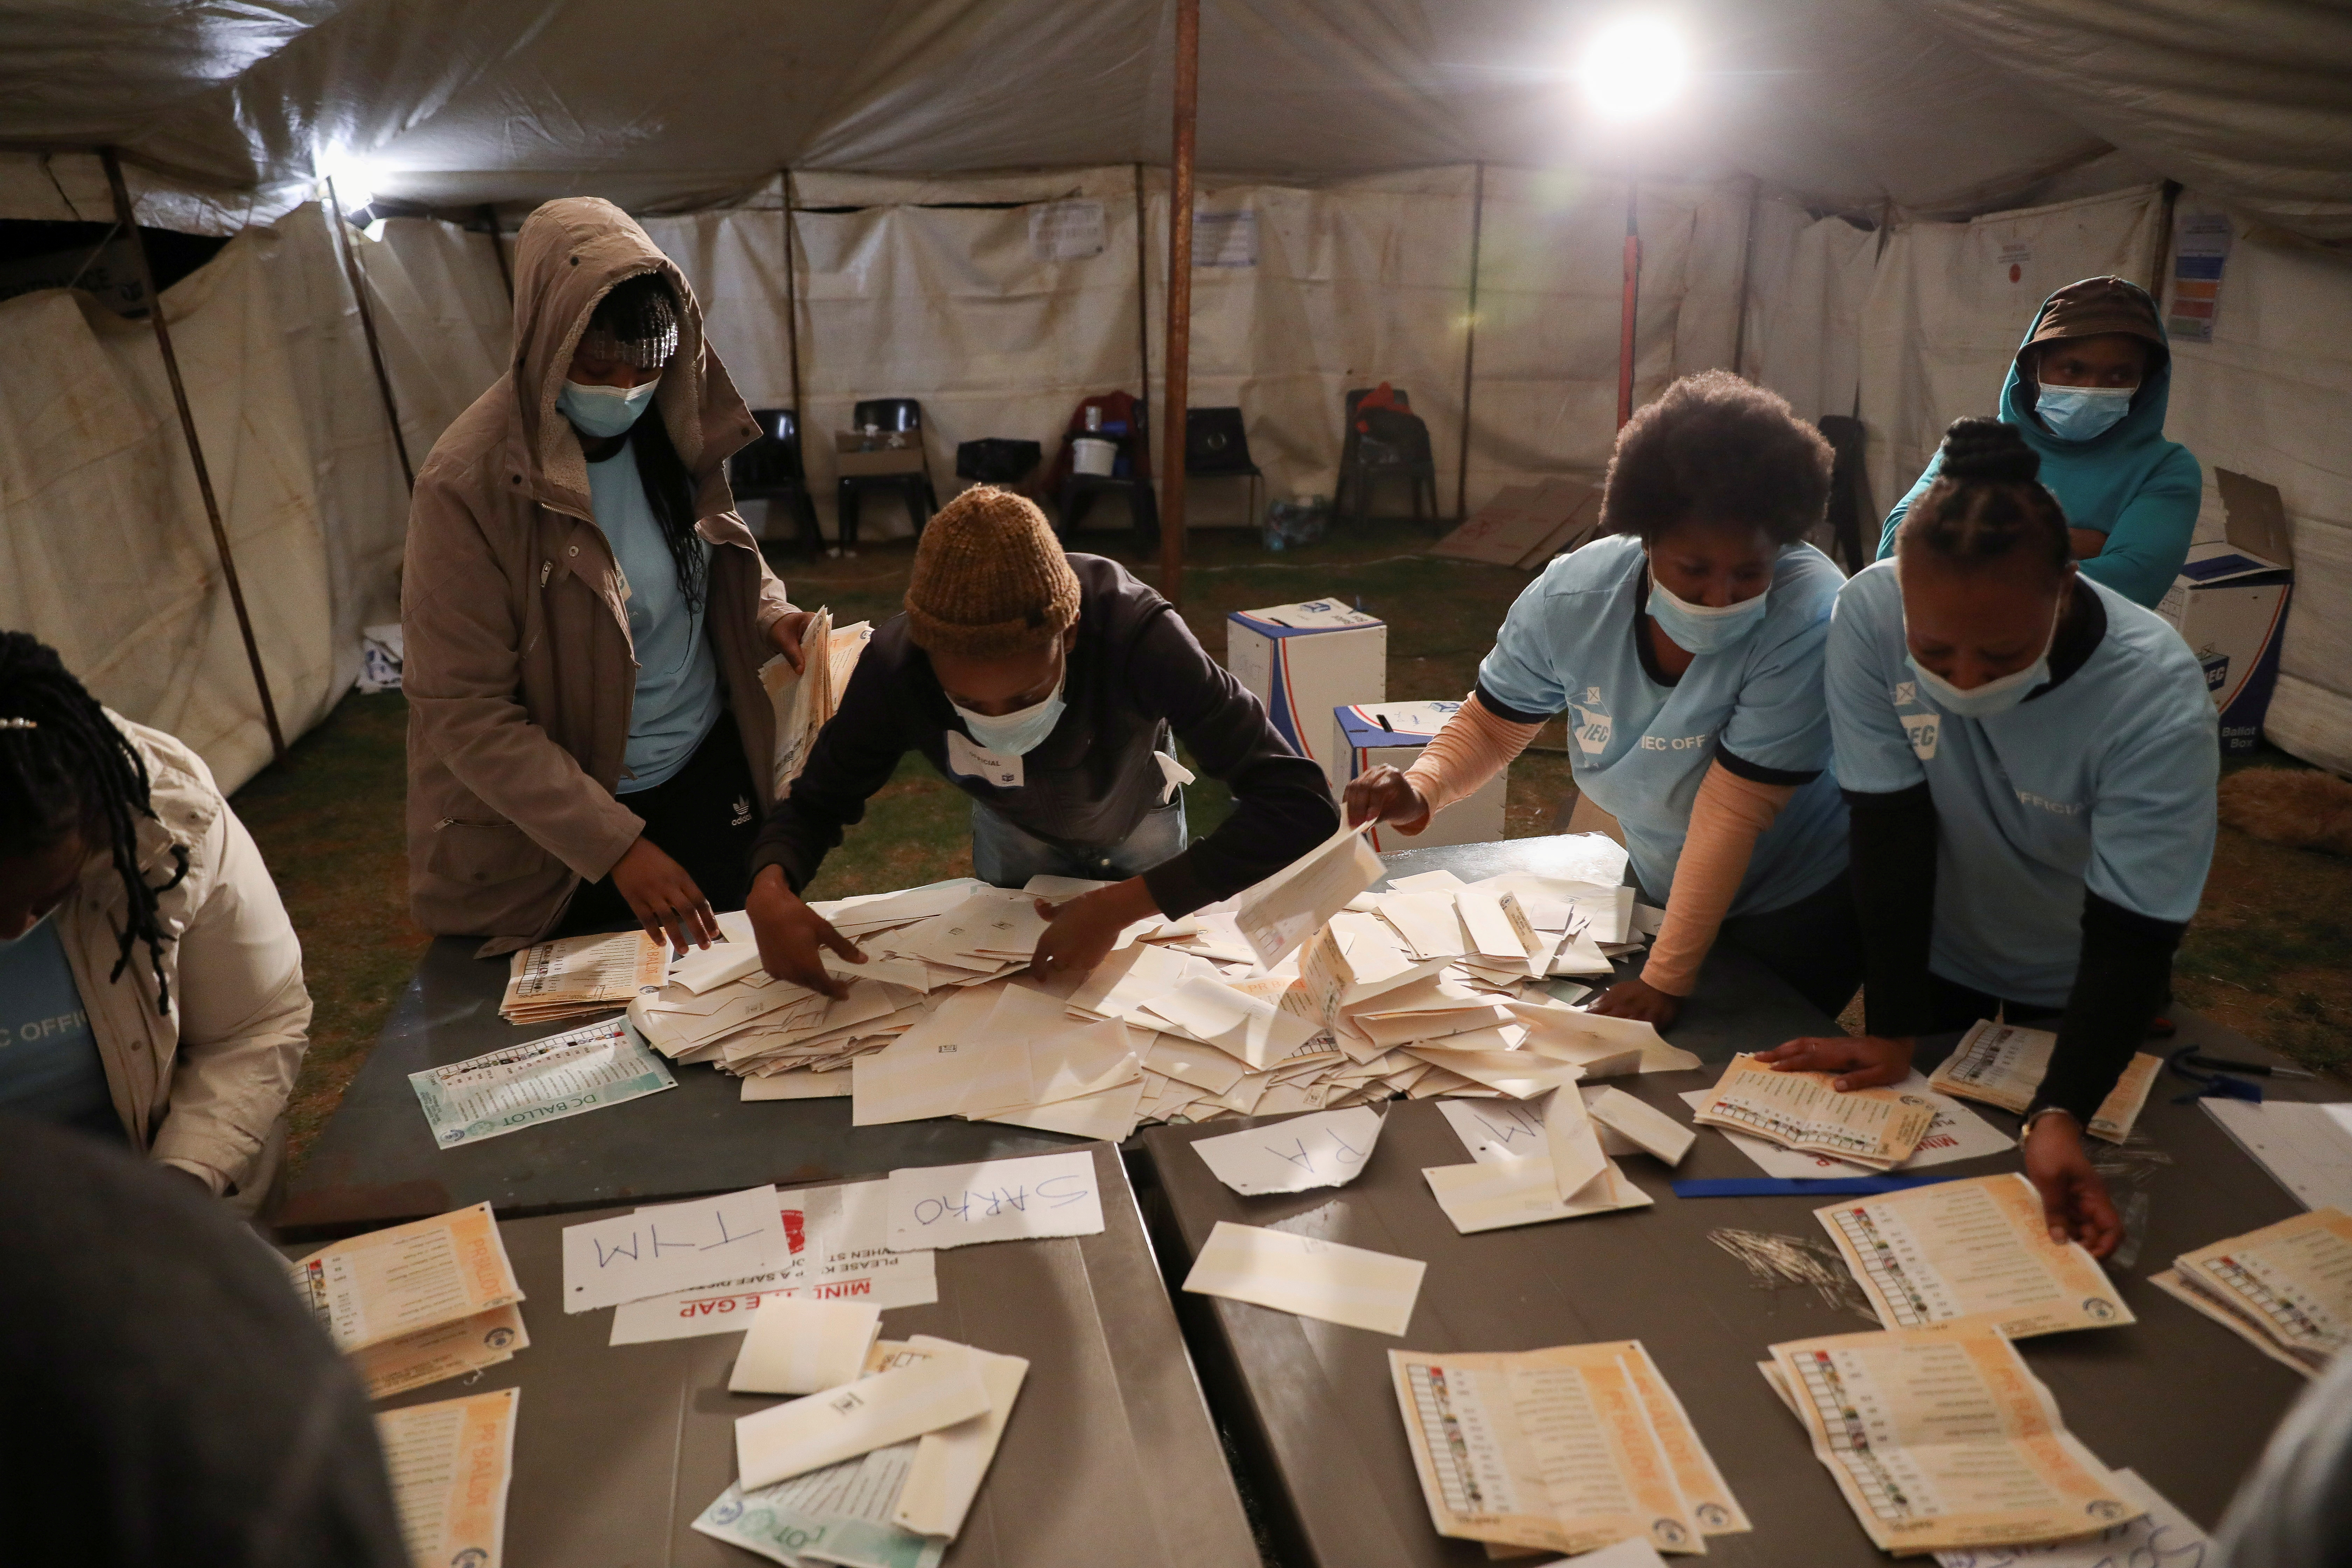 Election officials count ballots after the closing of the local government elections, at a farm in Alewynspoort, outside  Johannesburg, South Africa November 1, 2021.